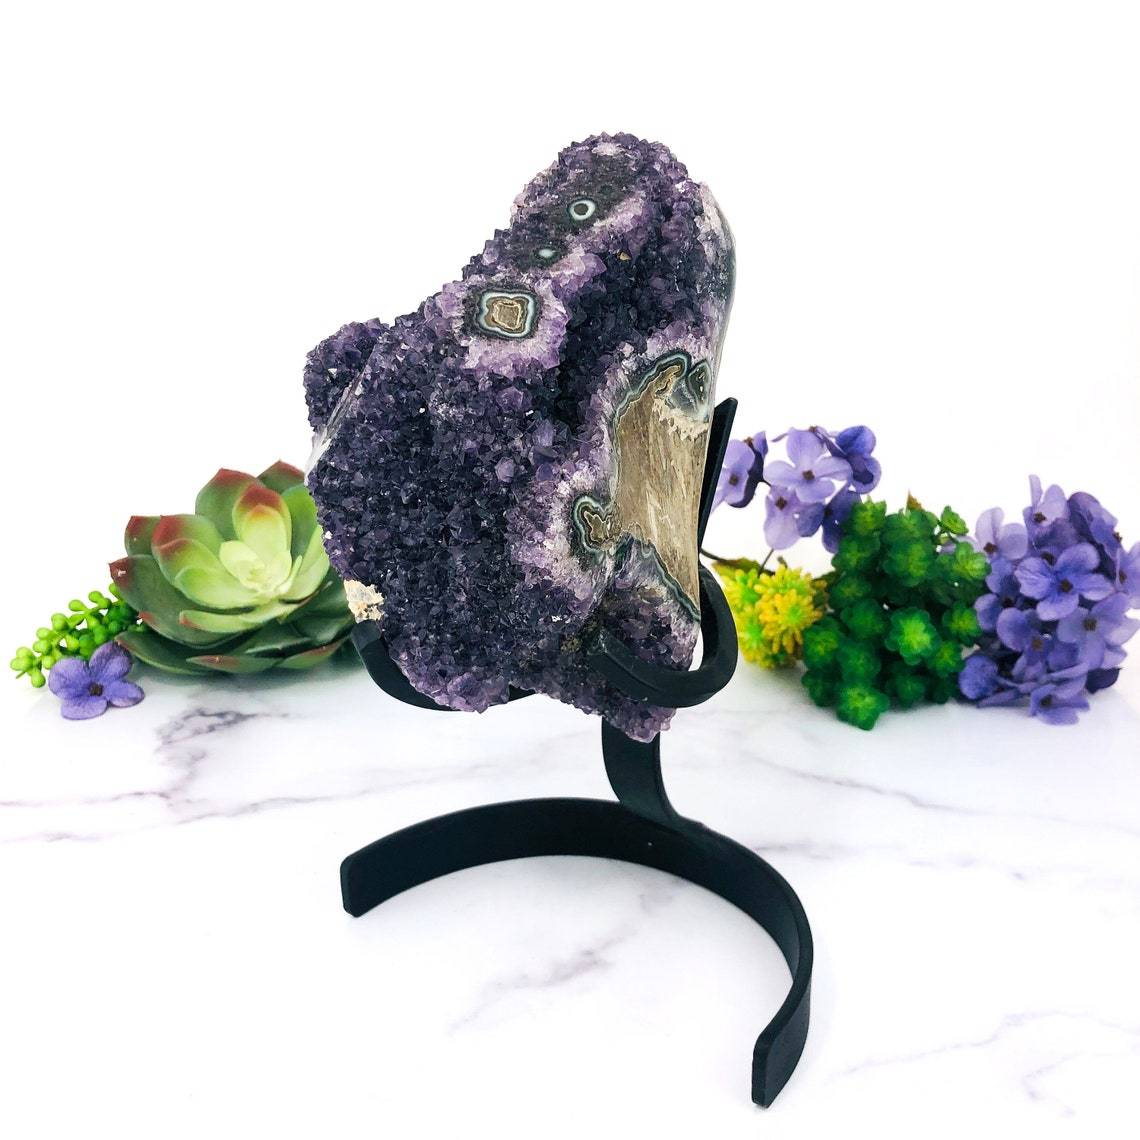 side view of Amethyst Purple Geode Crystal With Stalactite on Metal Stand with decorations in the background